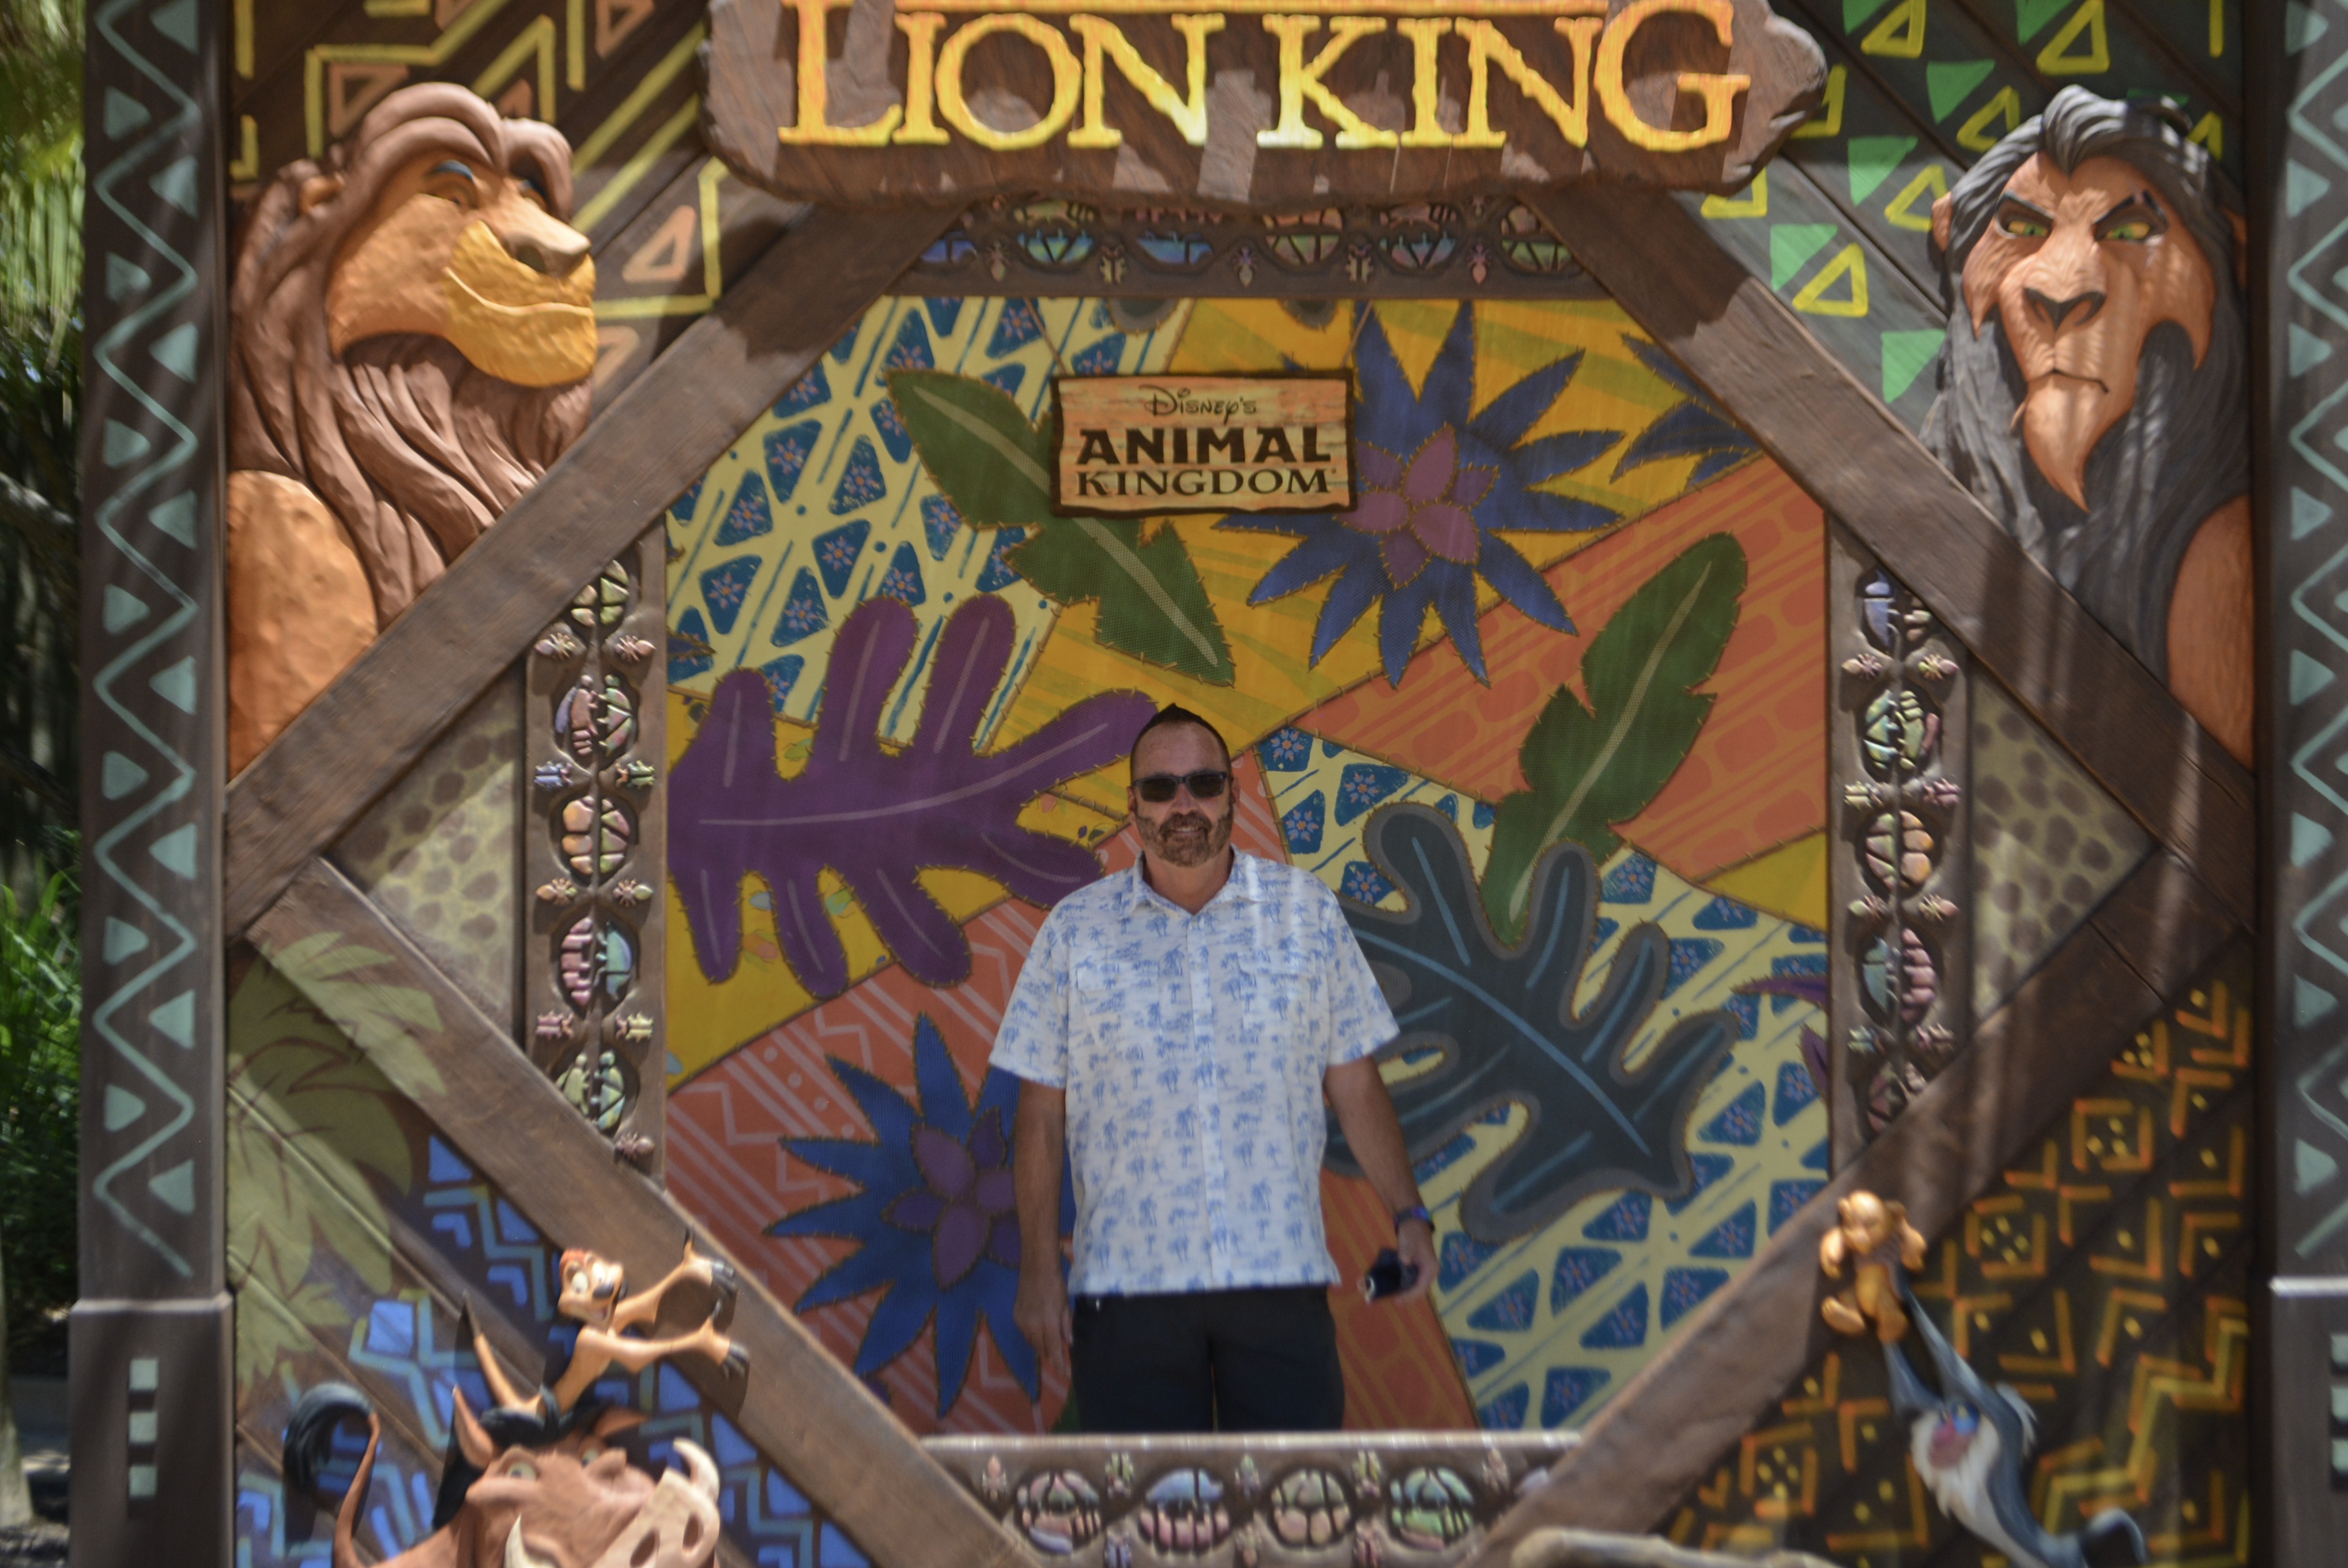 Chuck standing inside the Lion King photo op at Disney's Animal Kingdom